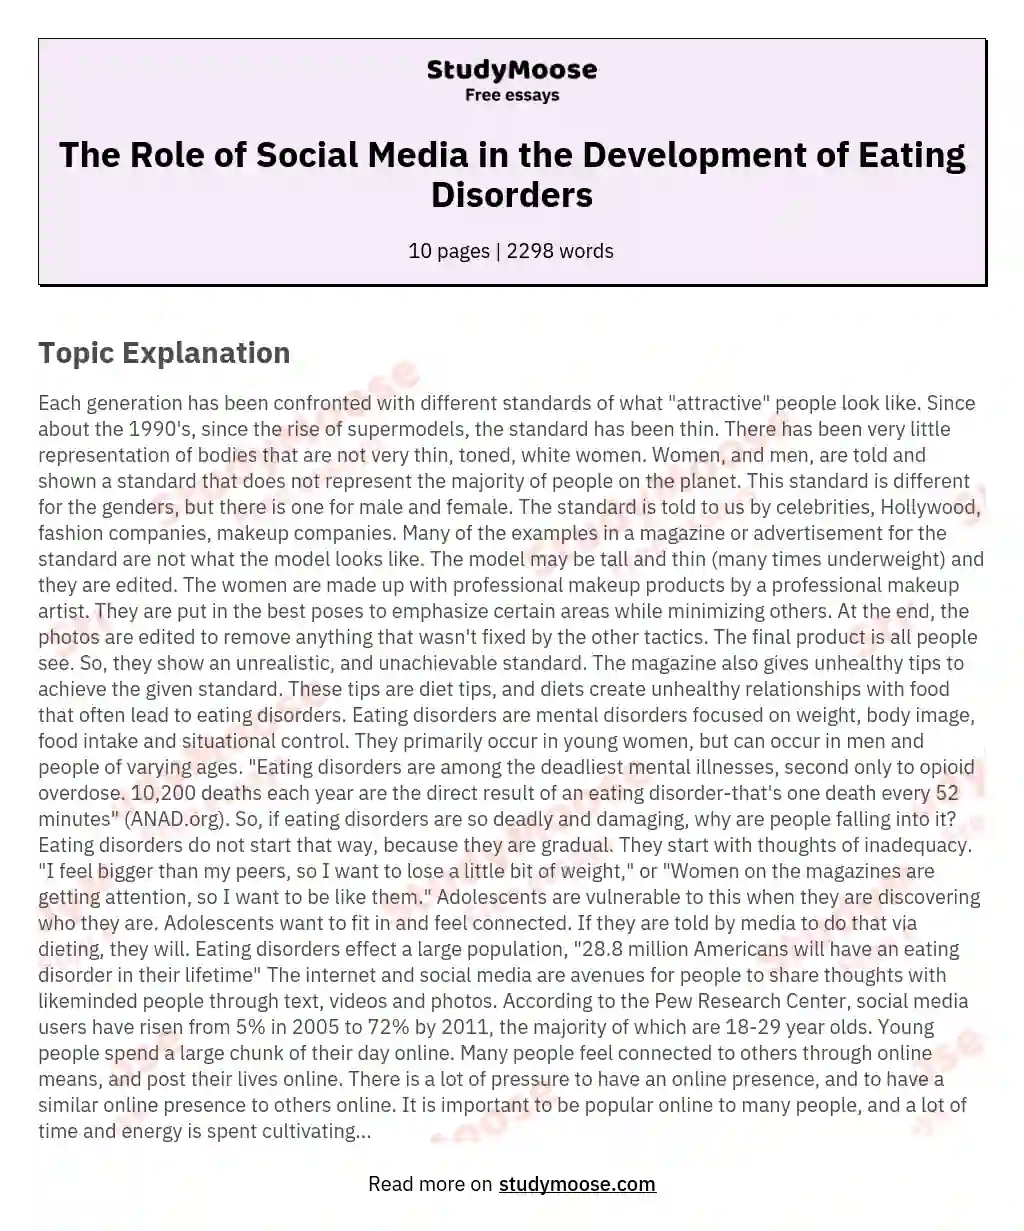 The Role of Social Media in the Development of Eating Disorders essay